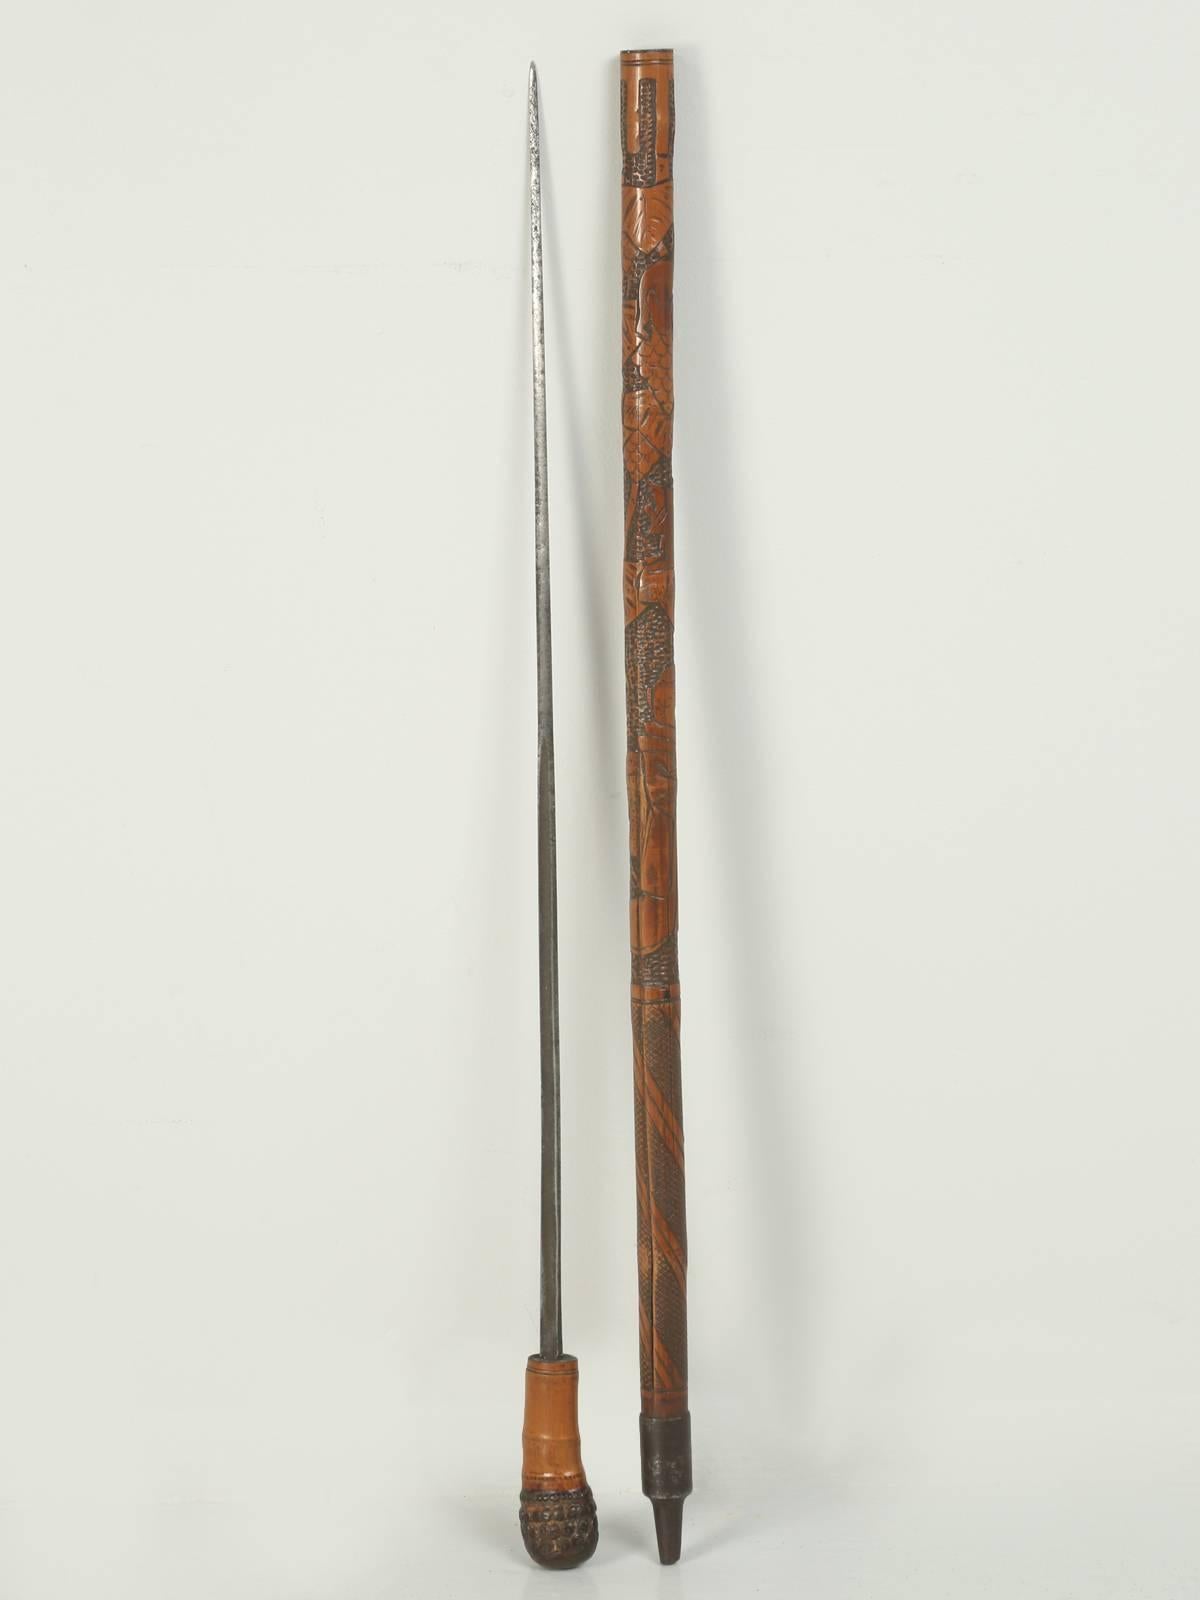 Early 20th Century Antique Walking Stick or Cane That Has a Hidden Large Sword Inside